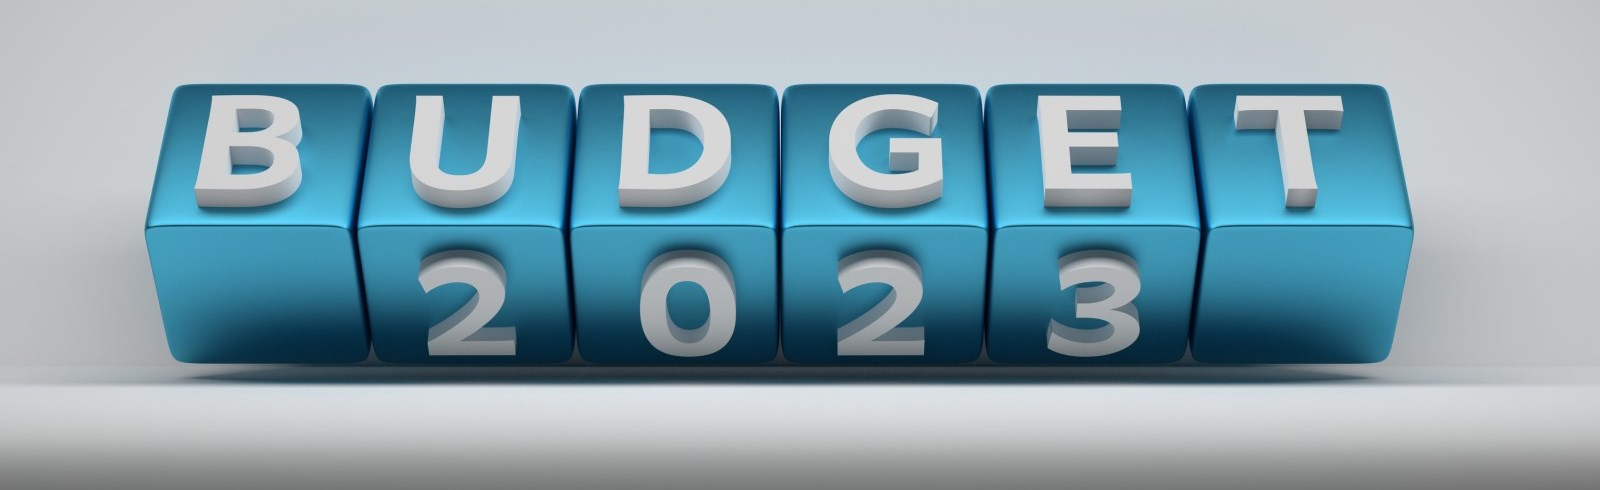 Wide banner with large words Budget 2023 on large blue cubes stock photo